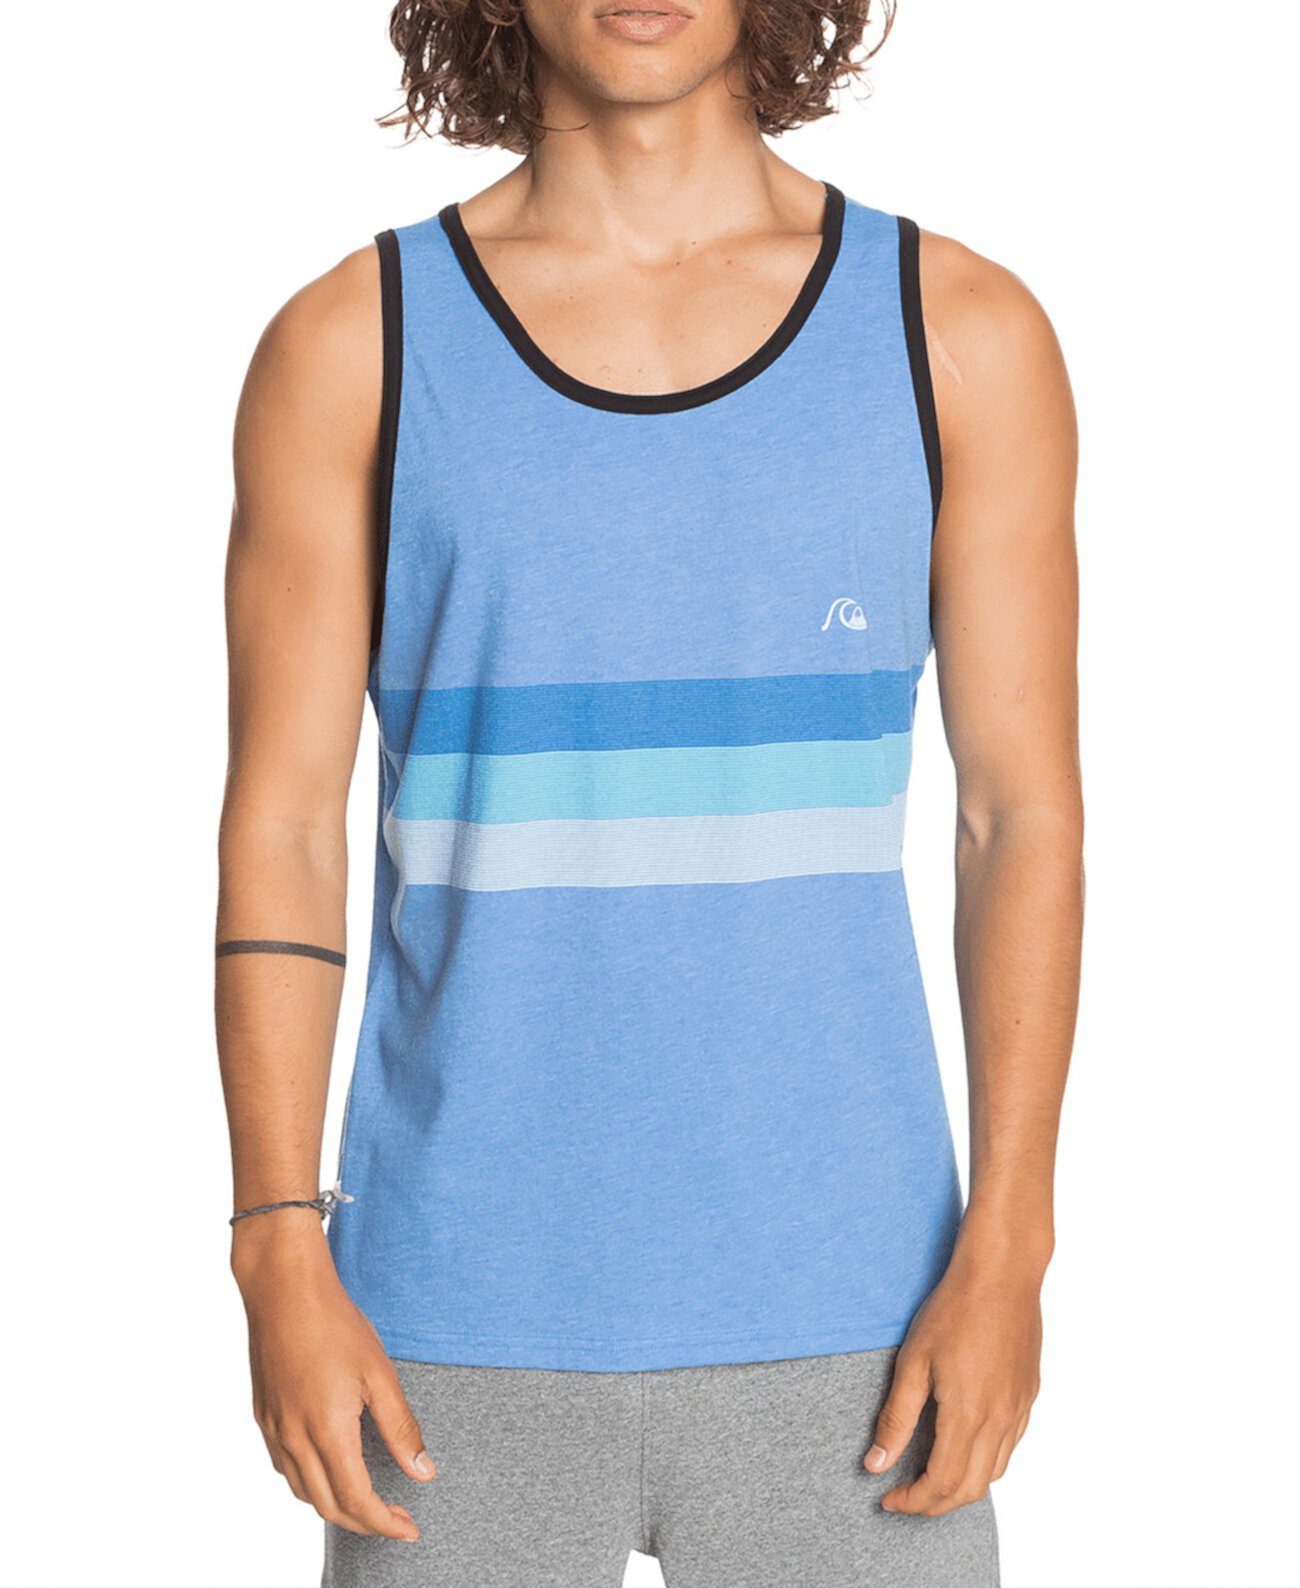 Men's Swell Vision Mj0 Tank Quiksilver